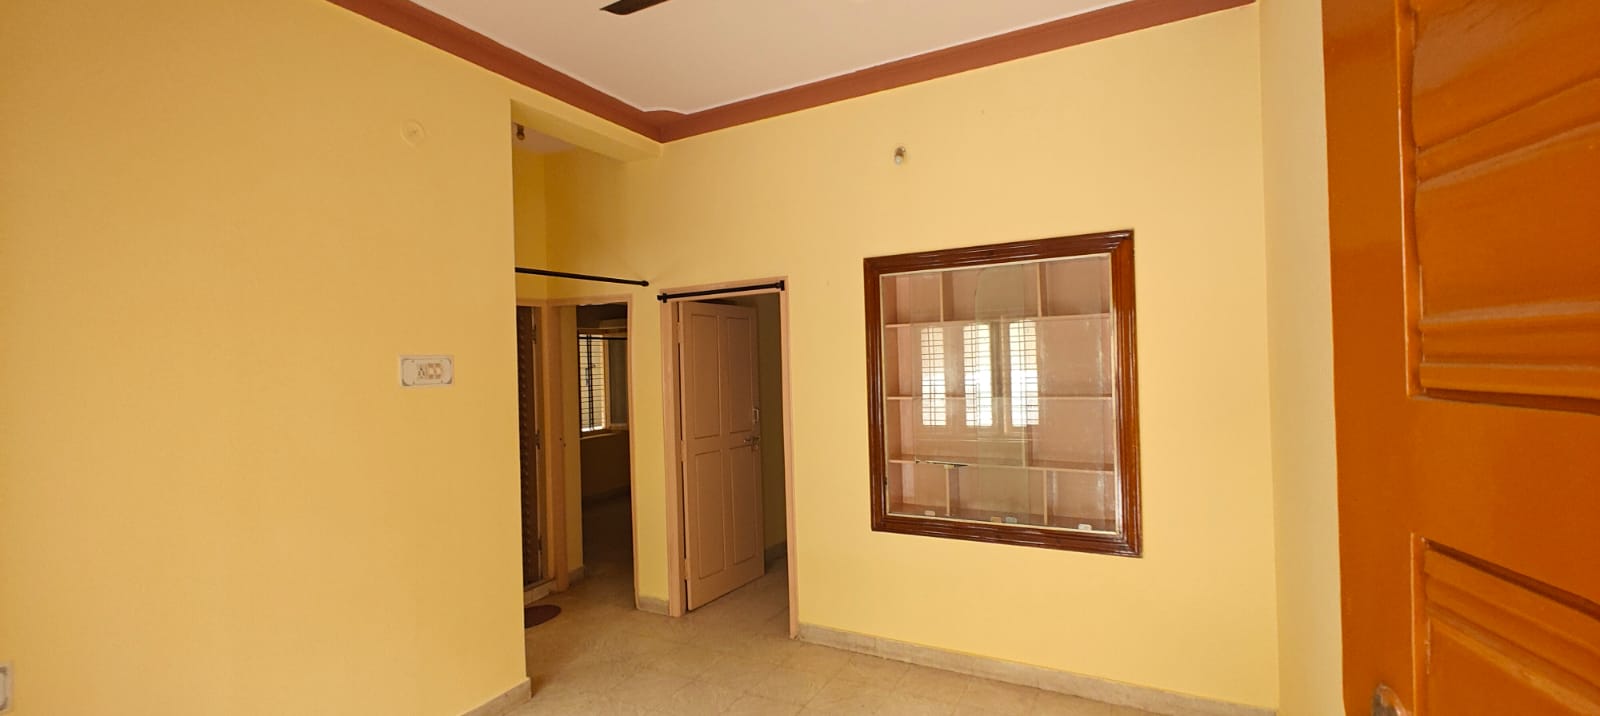 1 BHK Independent House for Lease Only at JAML2 - 4543 in Sanjay Nagar